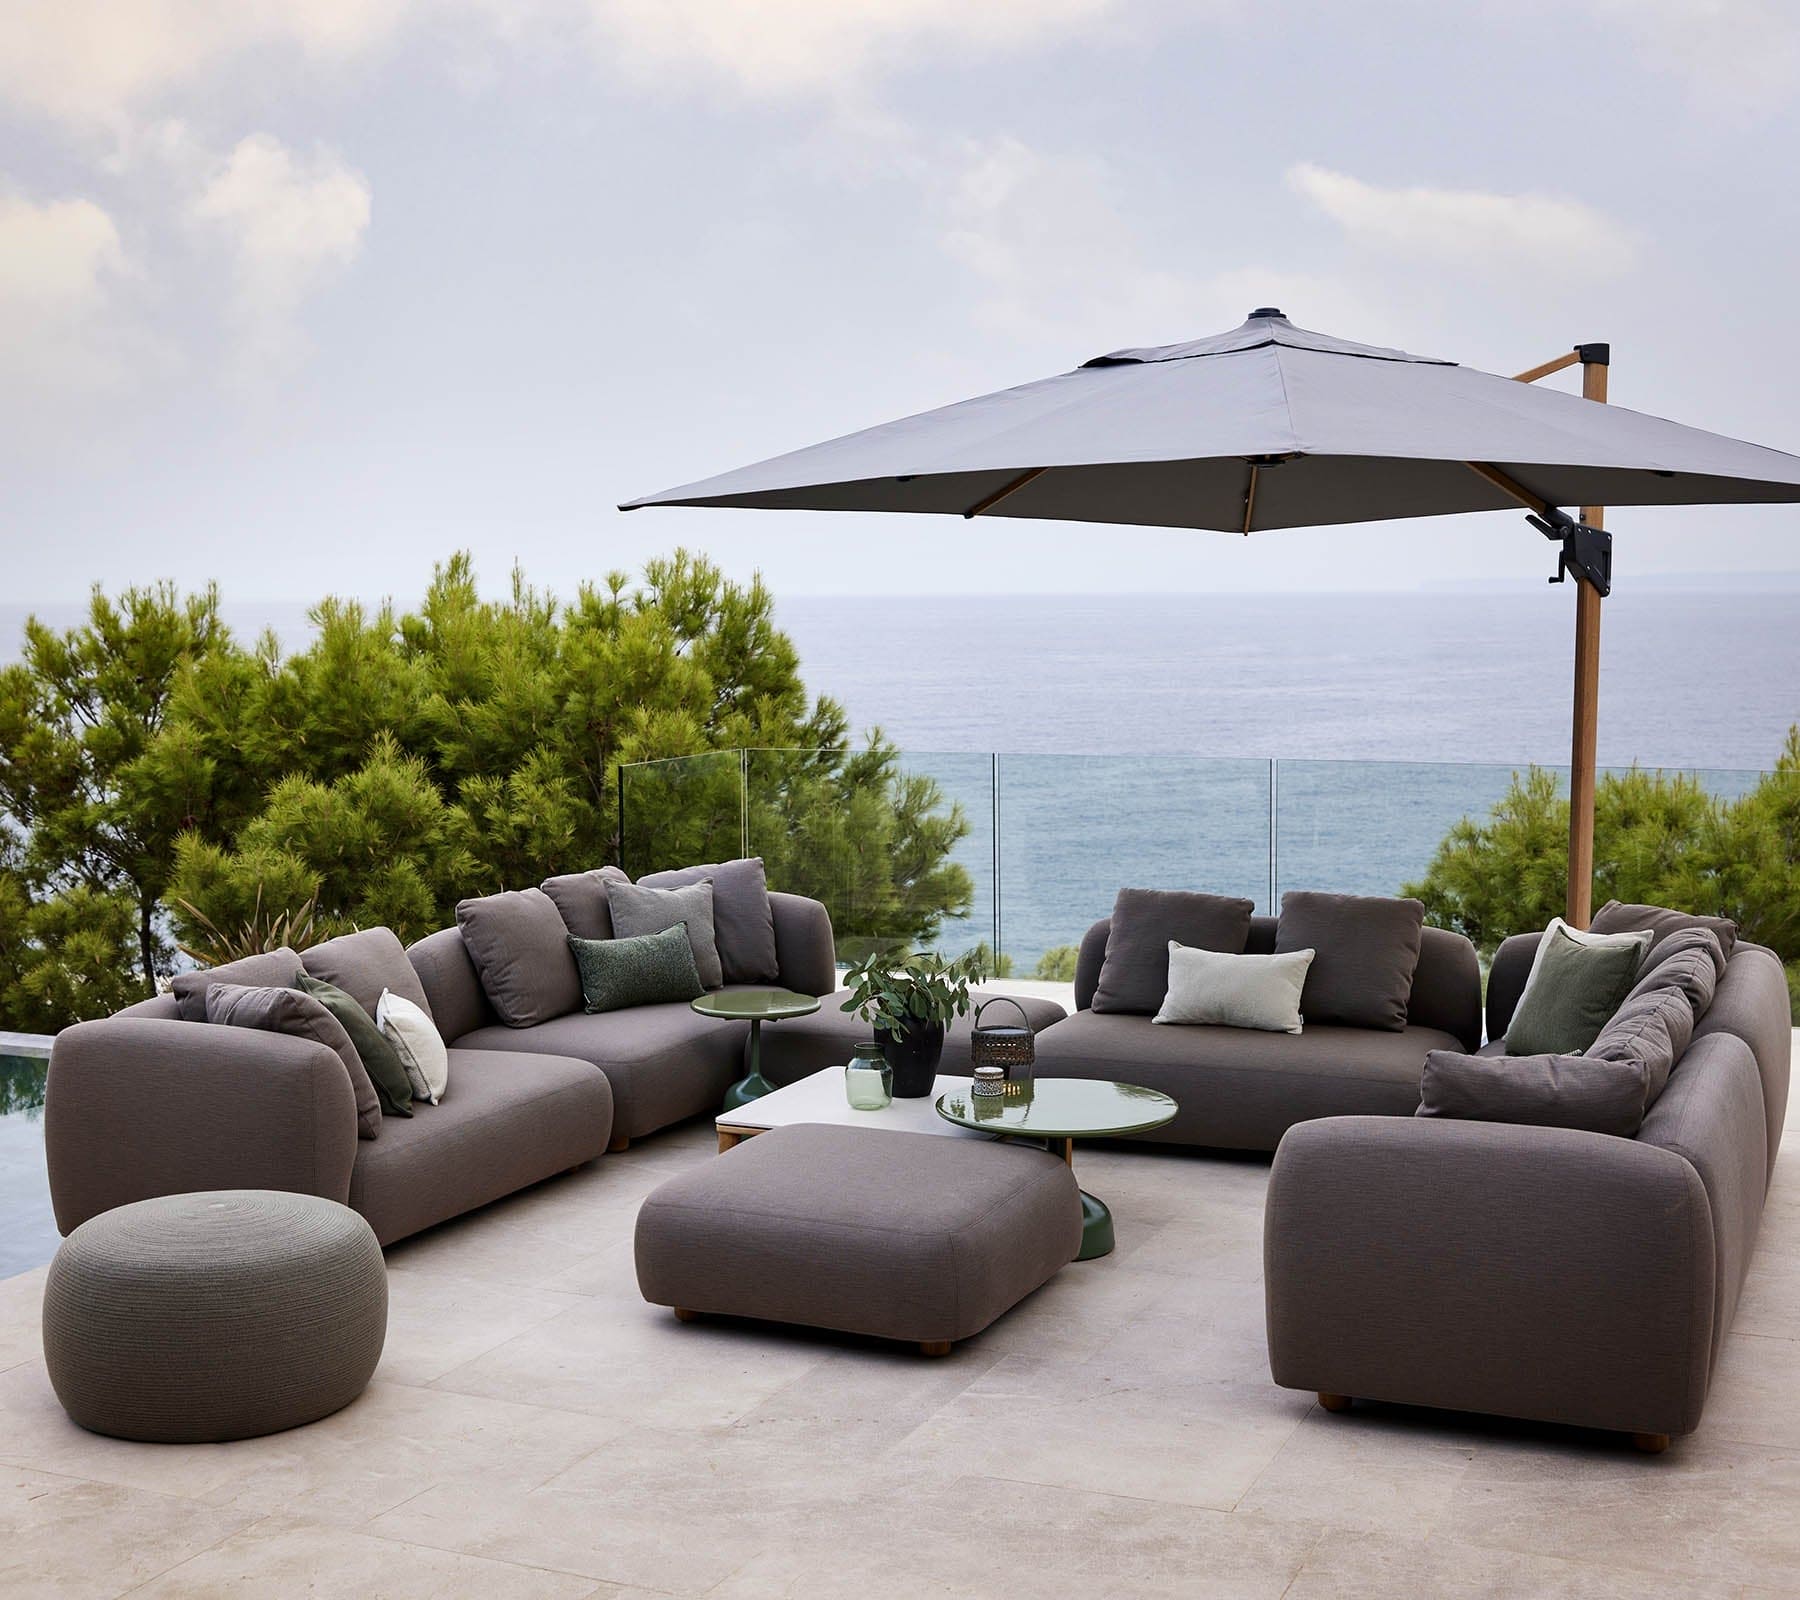 Boxhill's Capture Outdoor Pouf lifestyle image with Capture Module Sofa and Capture Coffee Table beside the pool with large umbrella shade